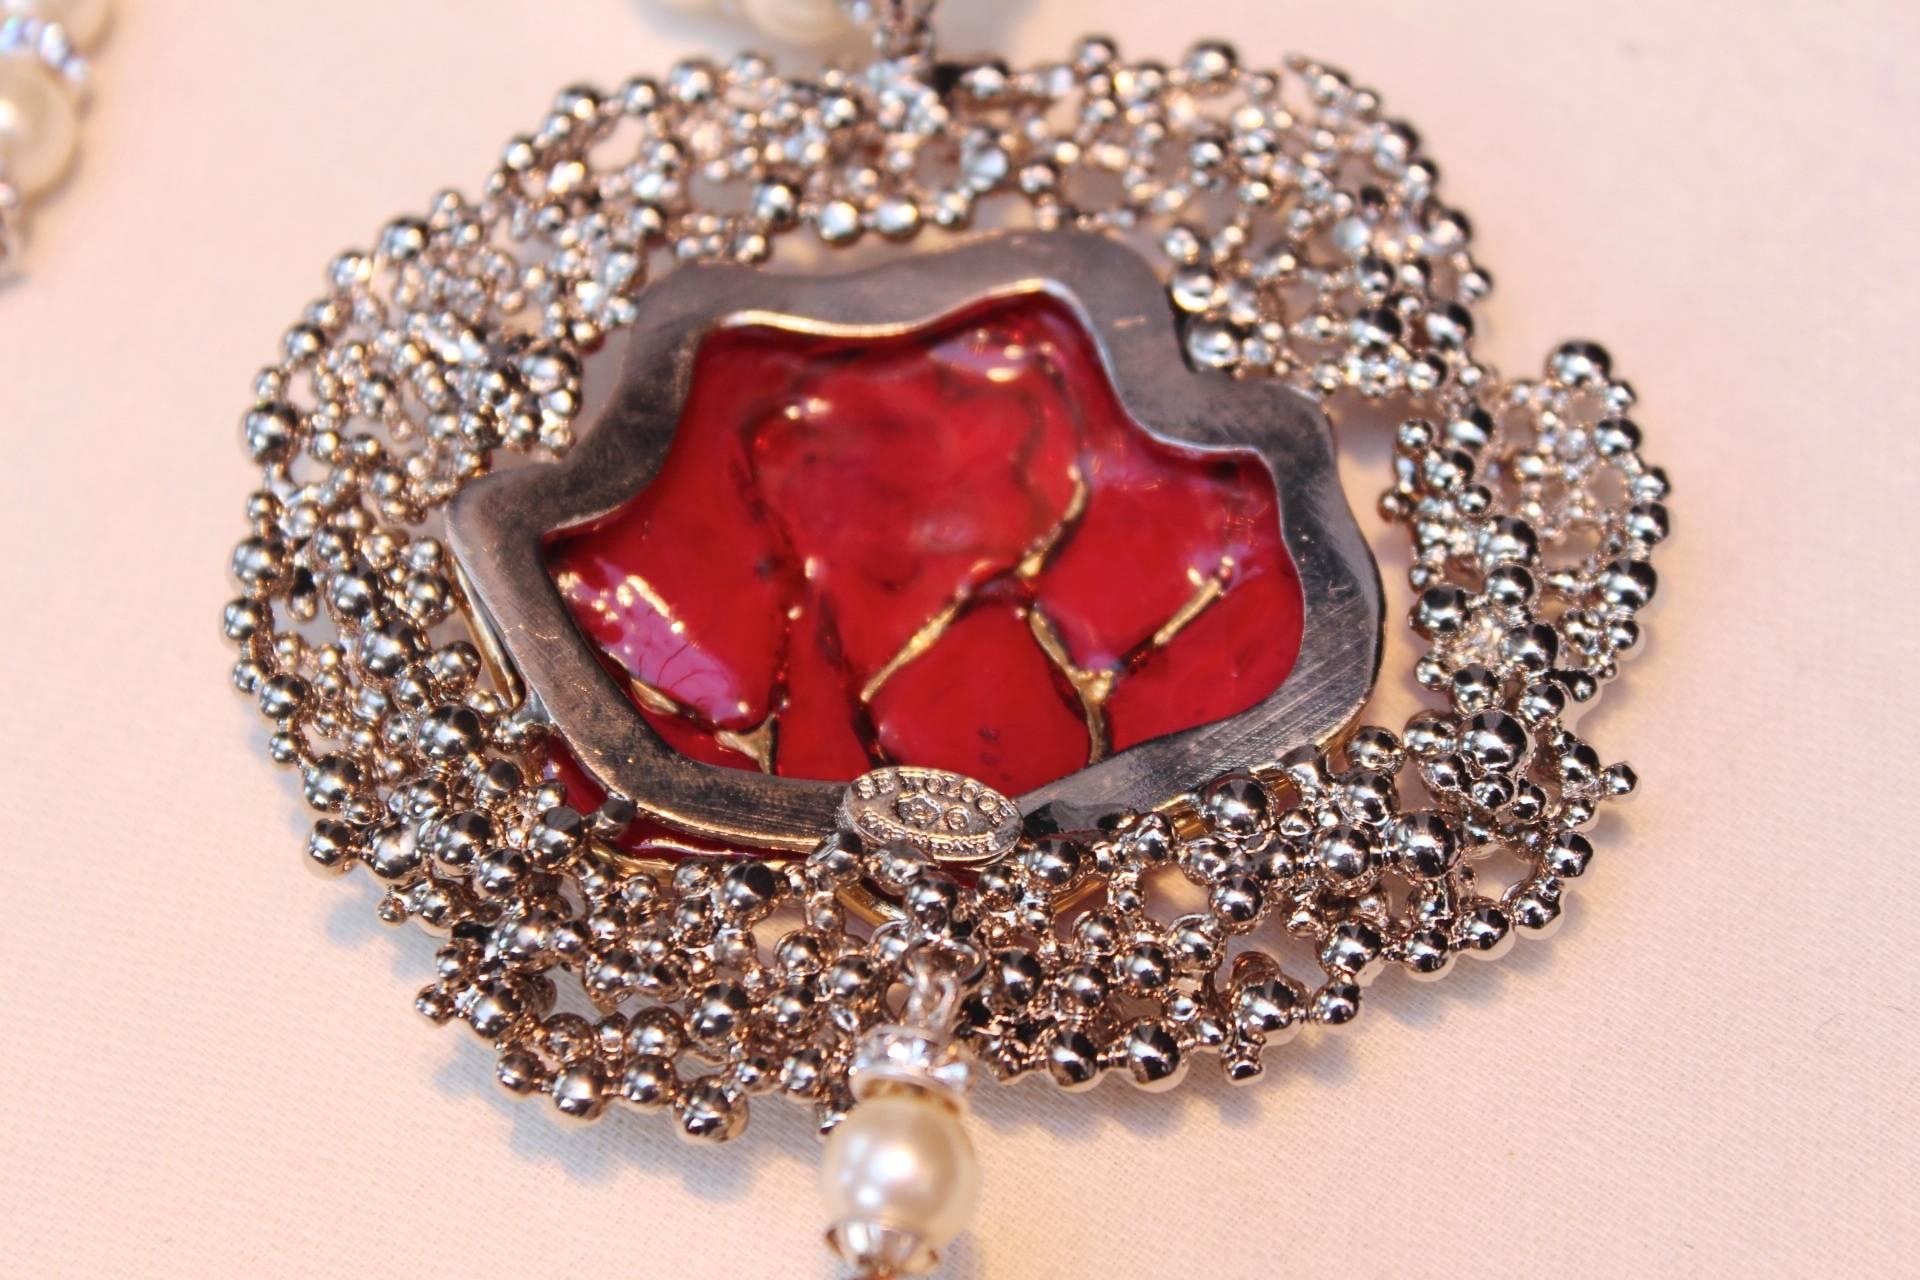 2011 Serge Eric Woloch Pendant Necklace with a Red Glass Rose and White Crystals 3